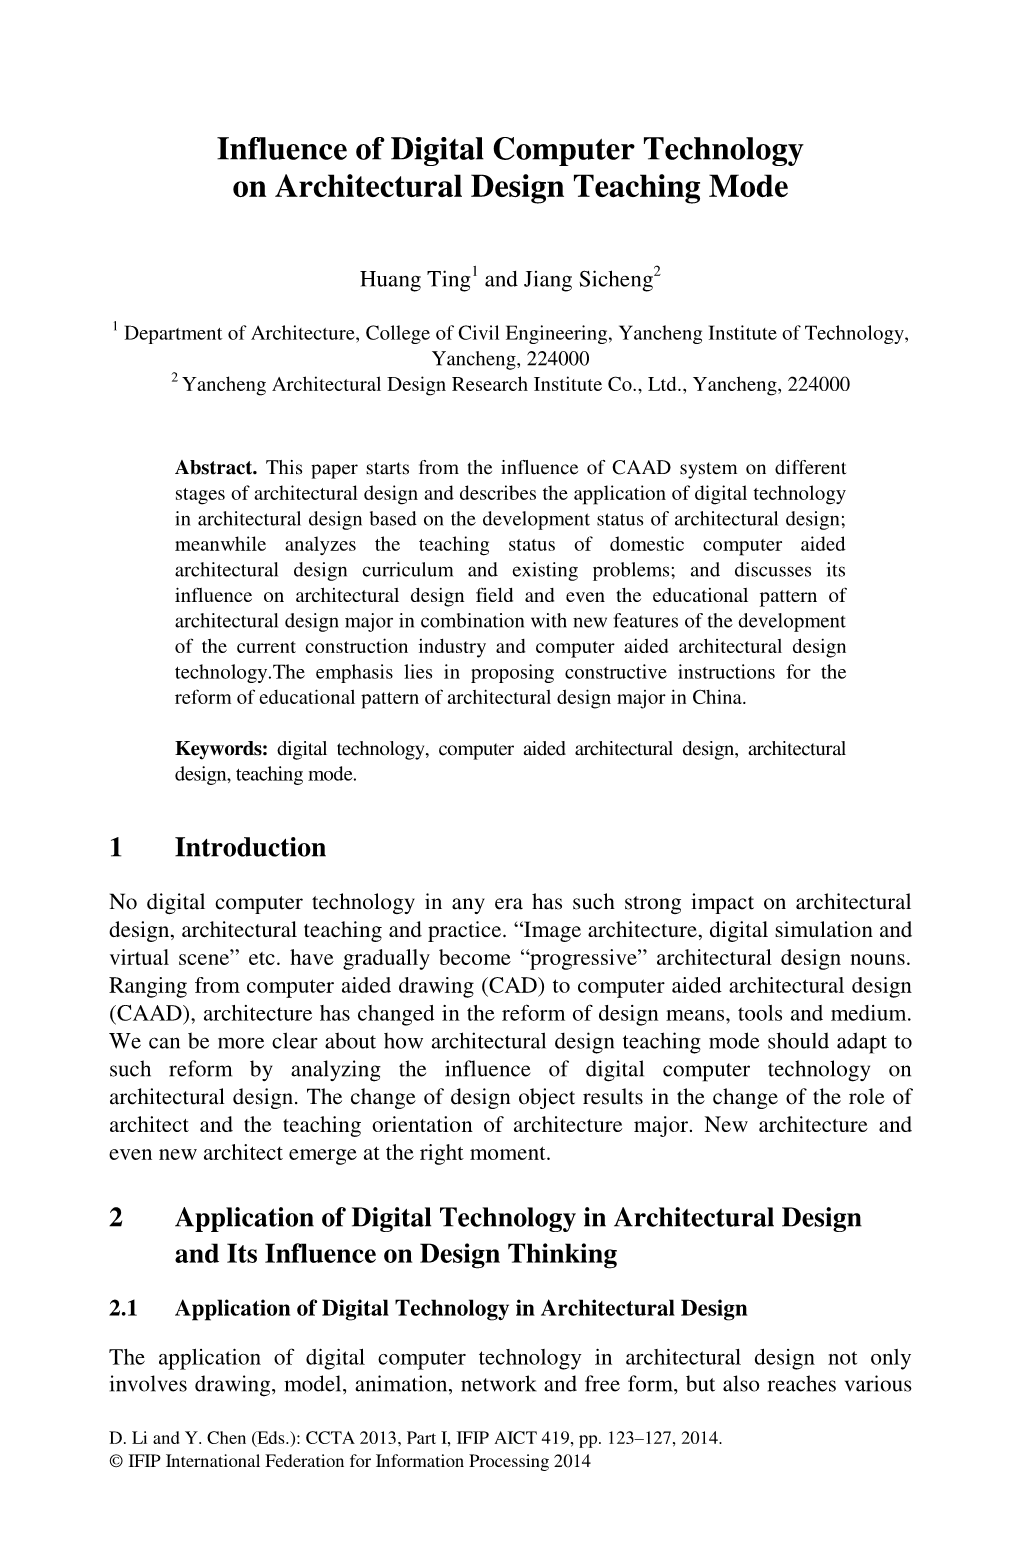 Influence of Digital Computer Technology on Architectural Design Teaching Mode